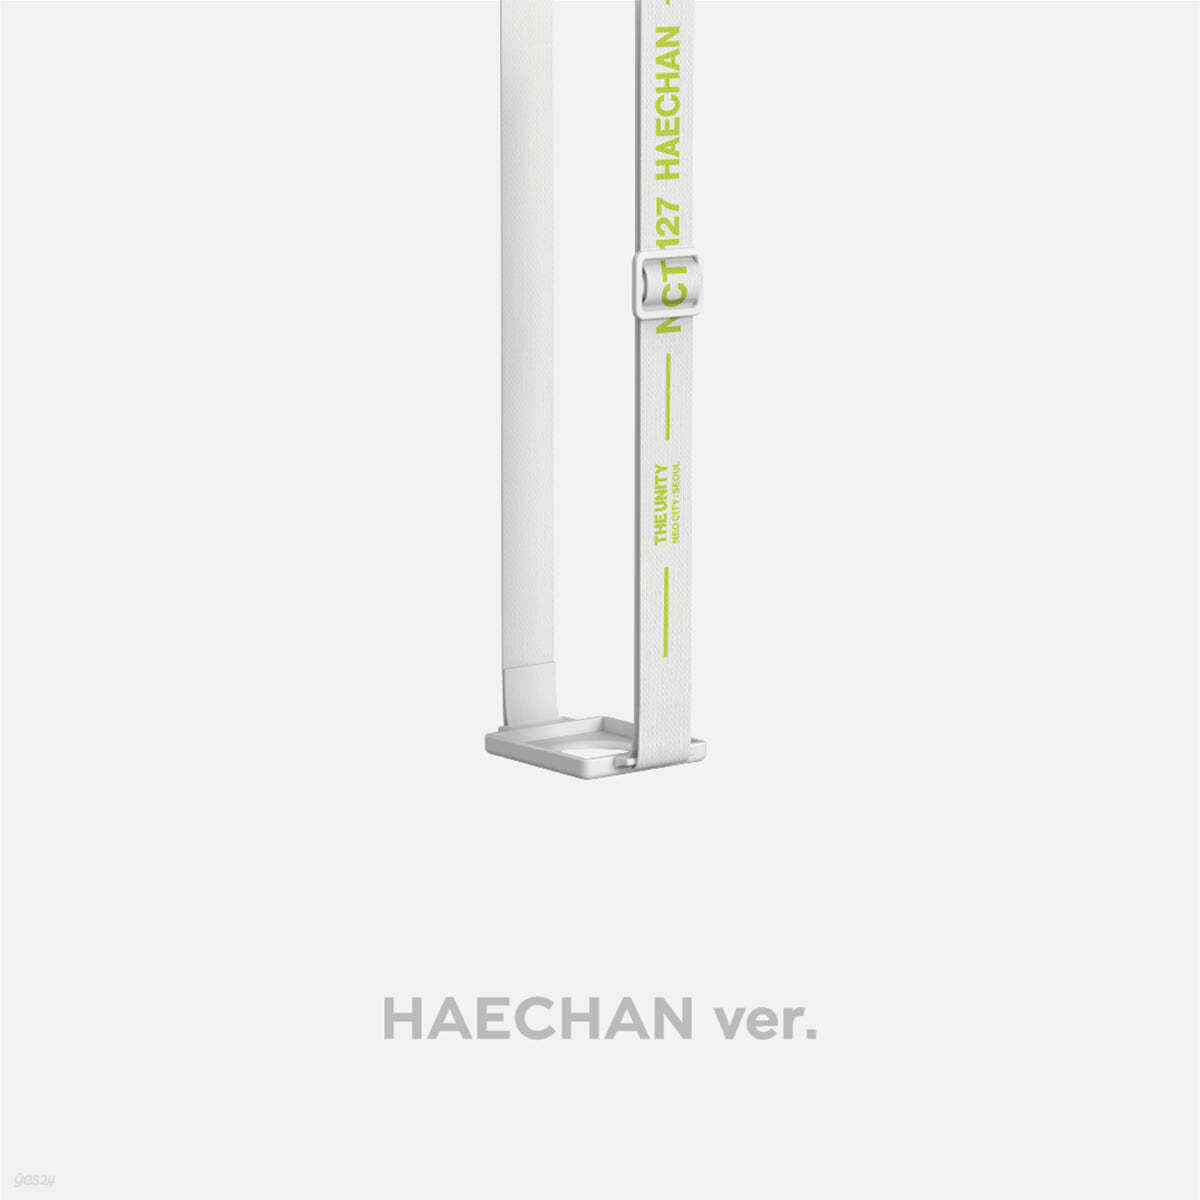 [NCT 127 3RD CONCERT 'THE UNITY'] OFFICIAL FANLIGHT STRAP SET [해찬 ver.]